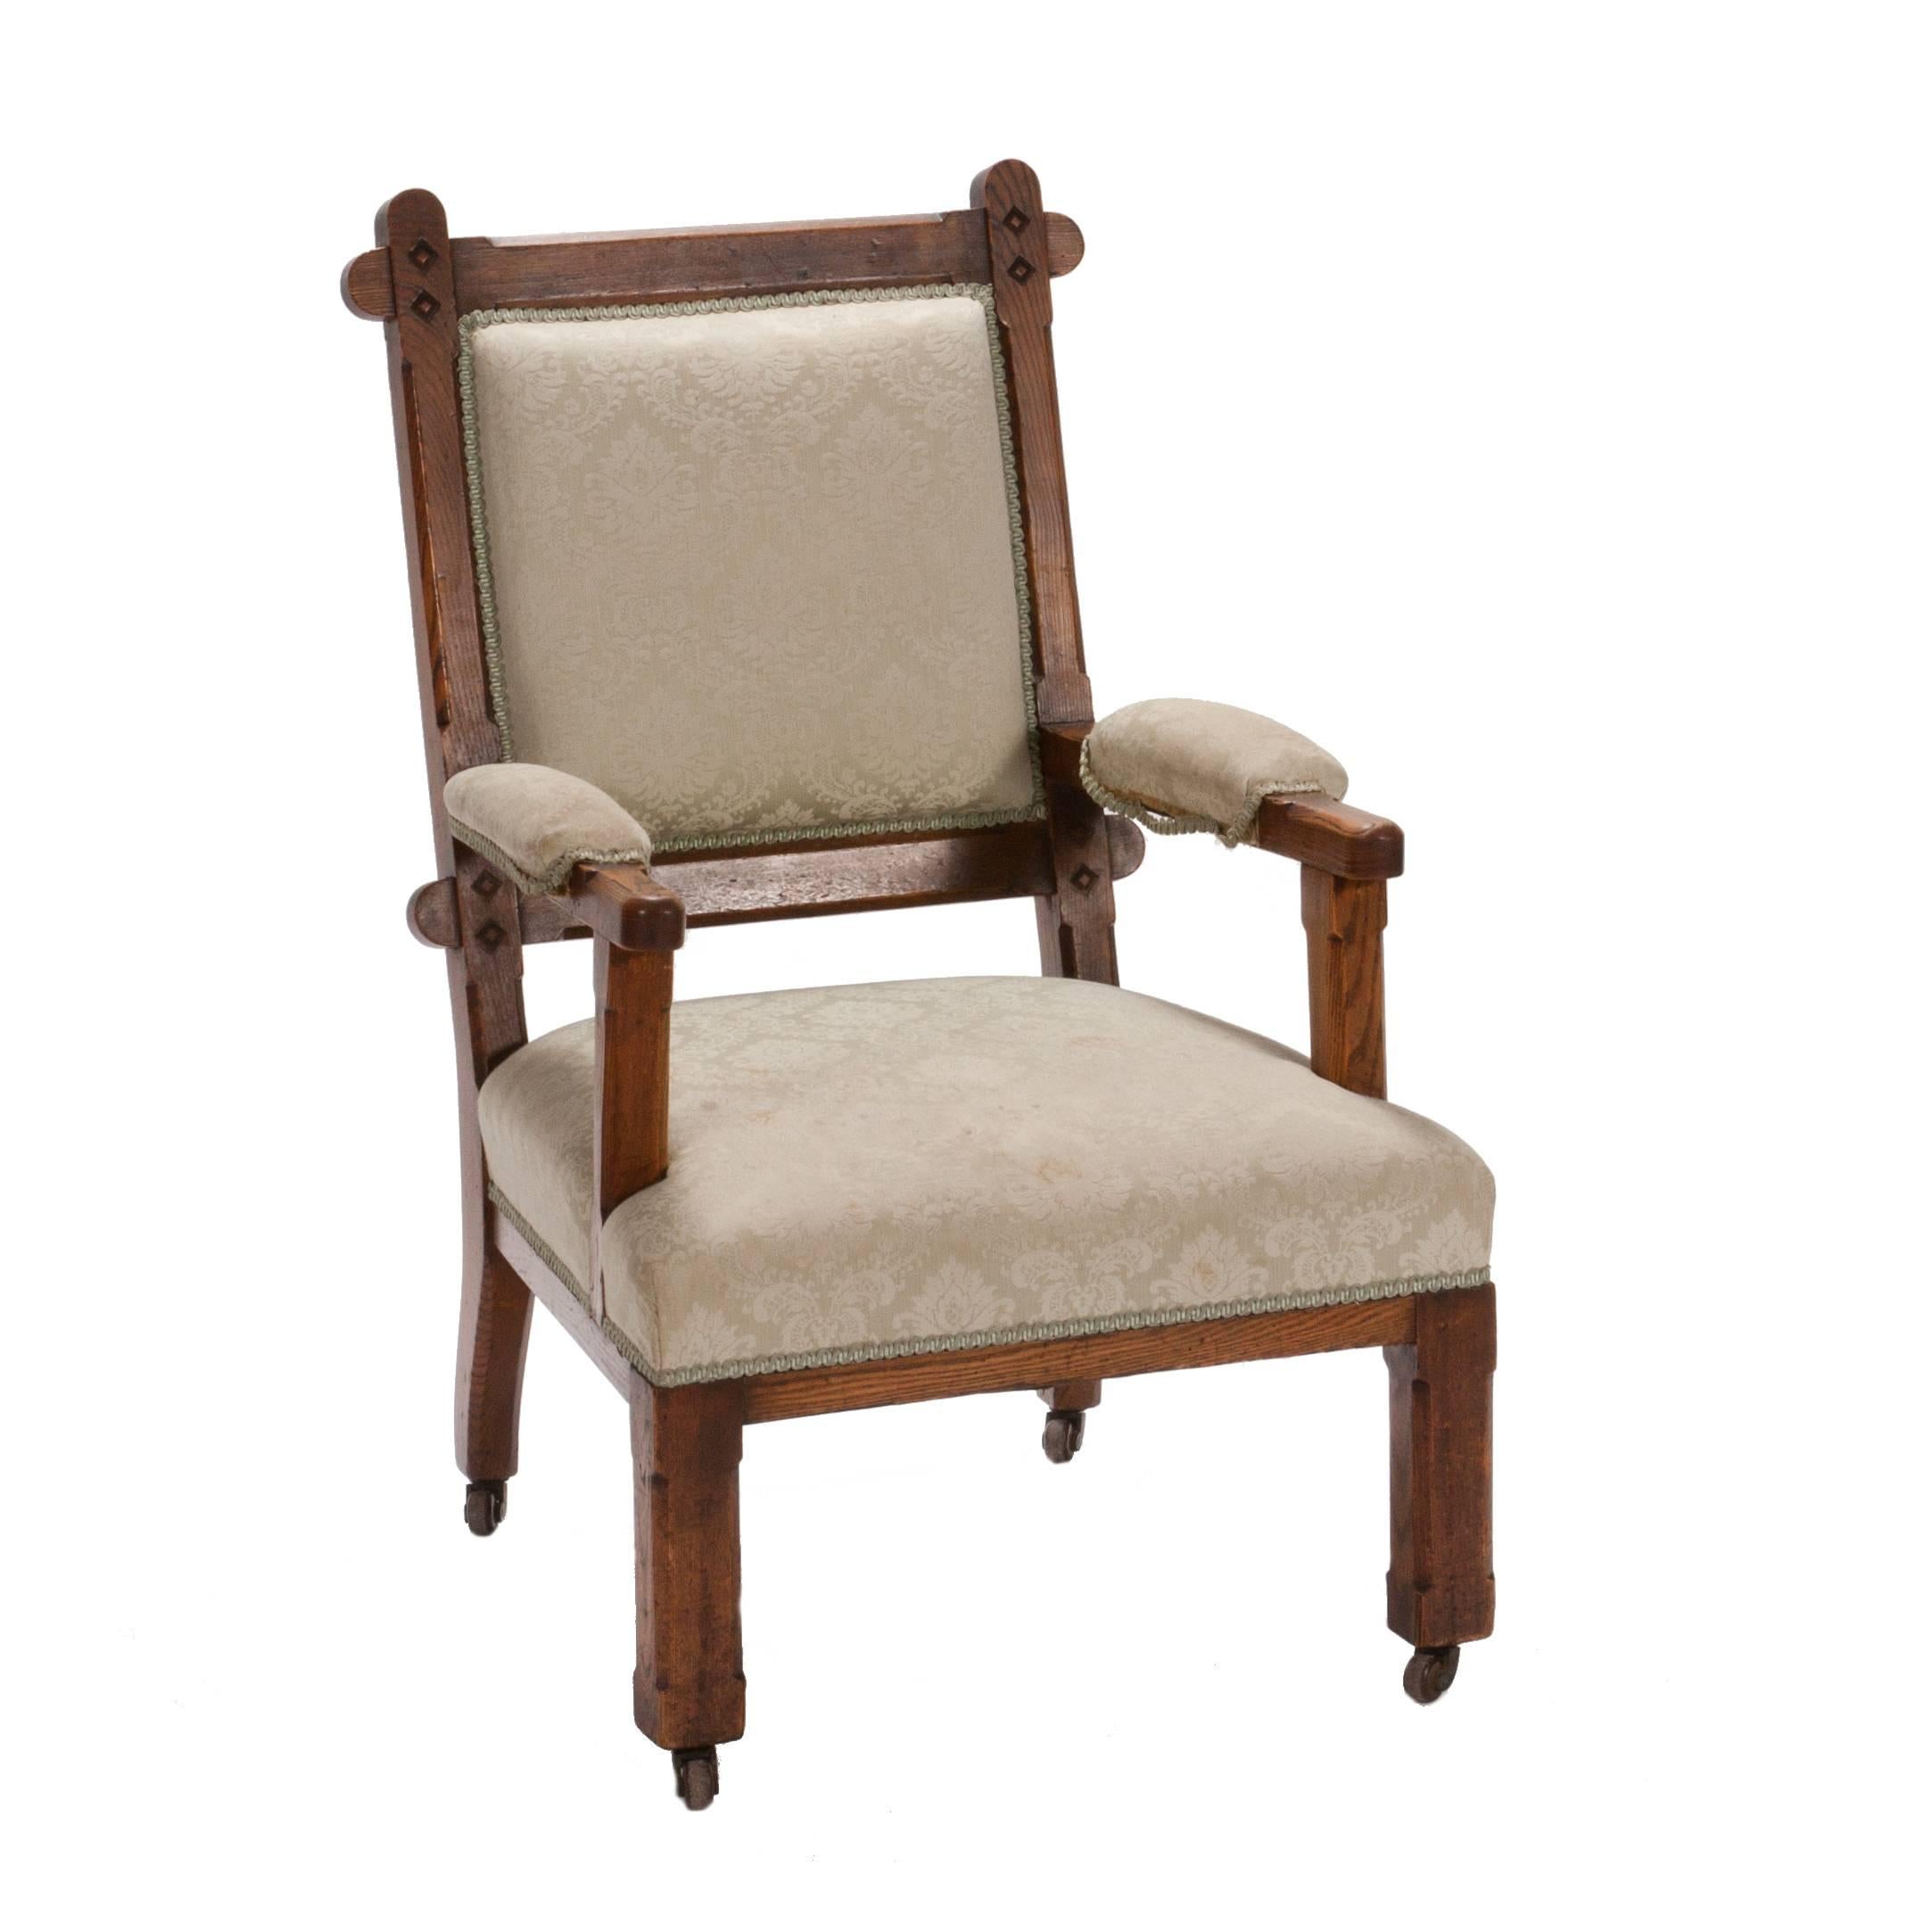 Early 20th Century English Arts and Crafts Oak Chair